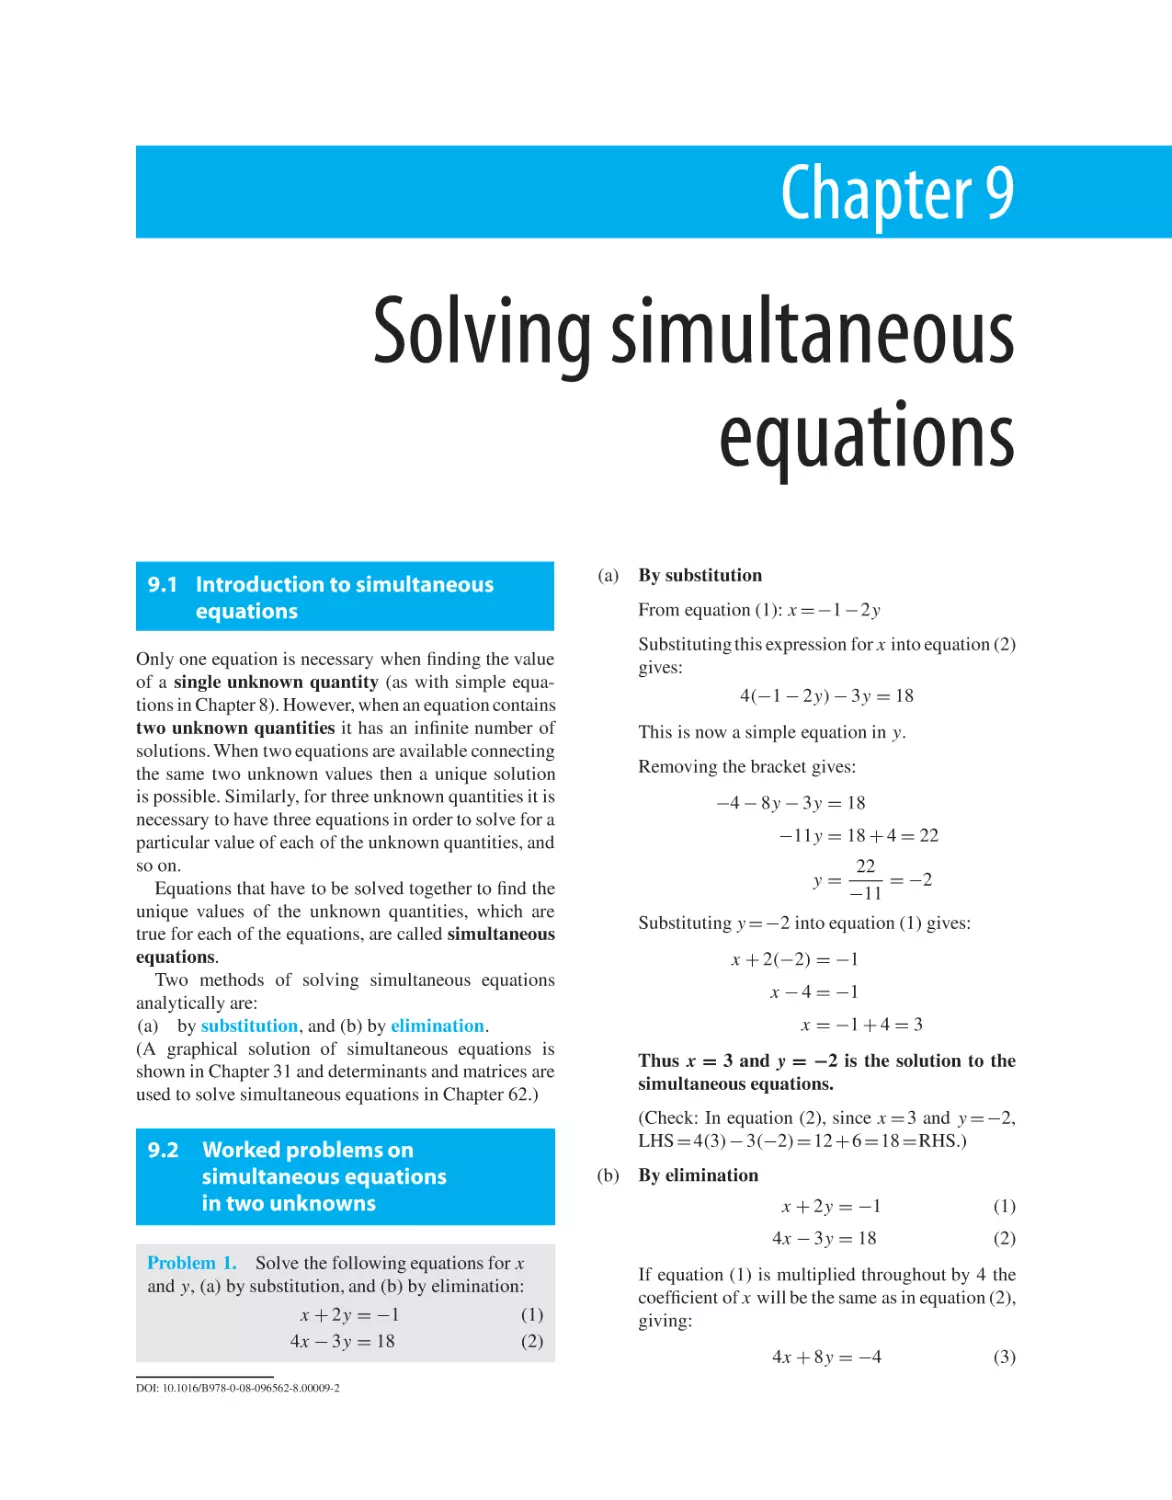 Chapter 9. Solving simultaneous equations
9.1 Introduction to simultaneous equations
9.2 Worked problems on simultaneous equations in two unknowns